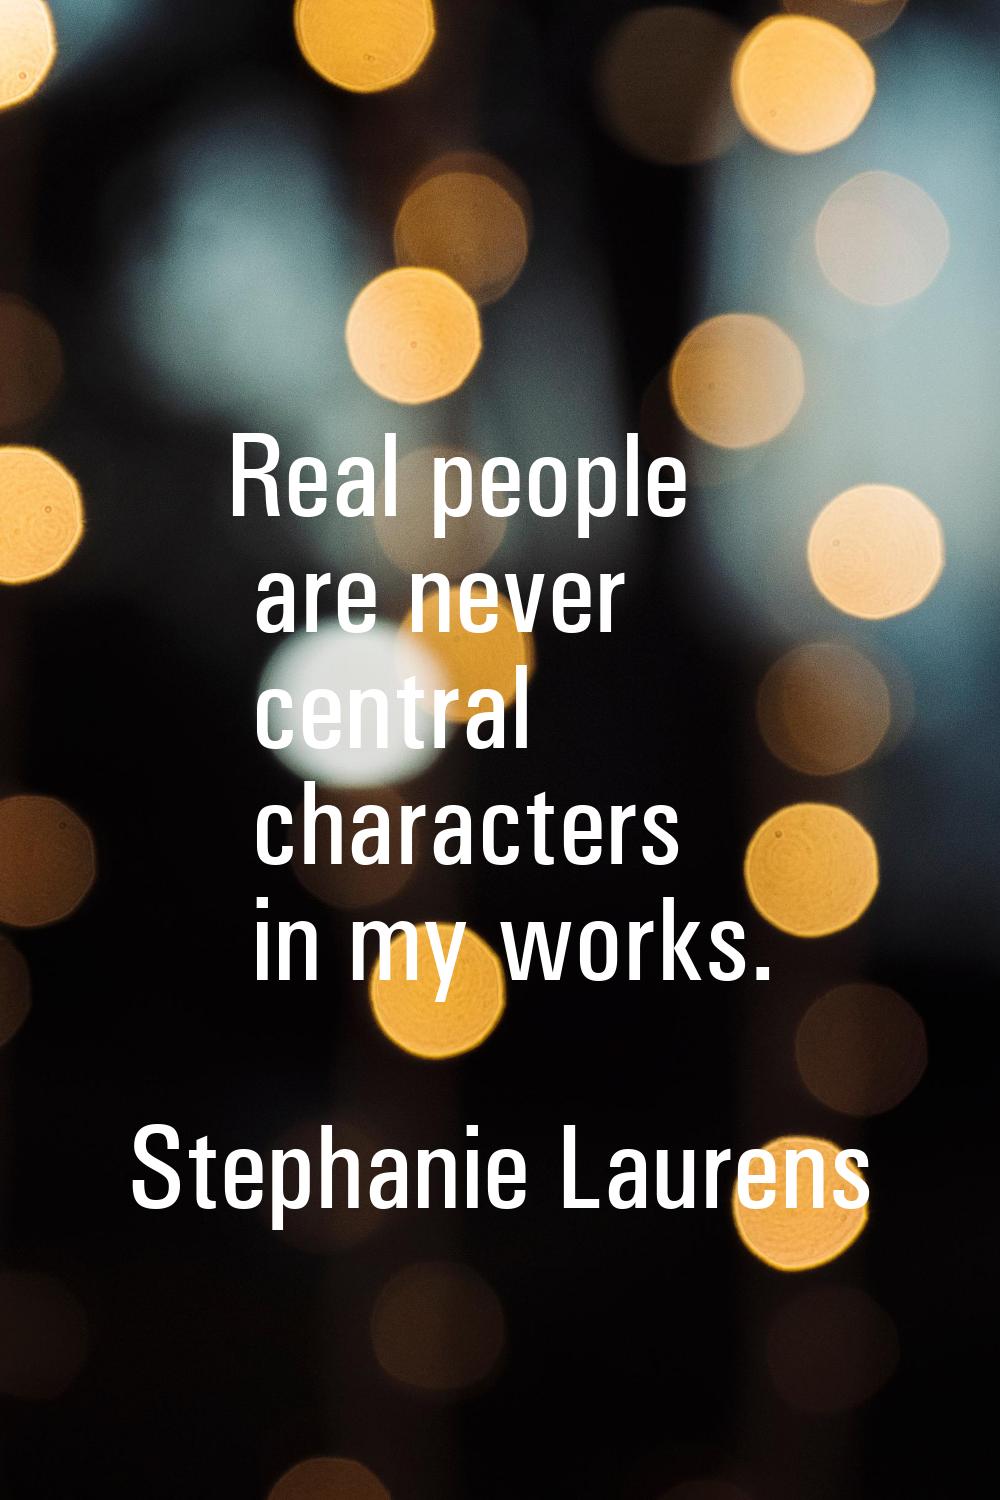 Real people are never central characters in my works.